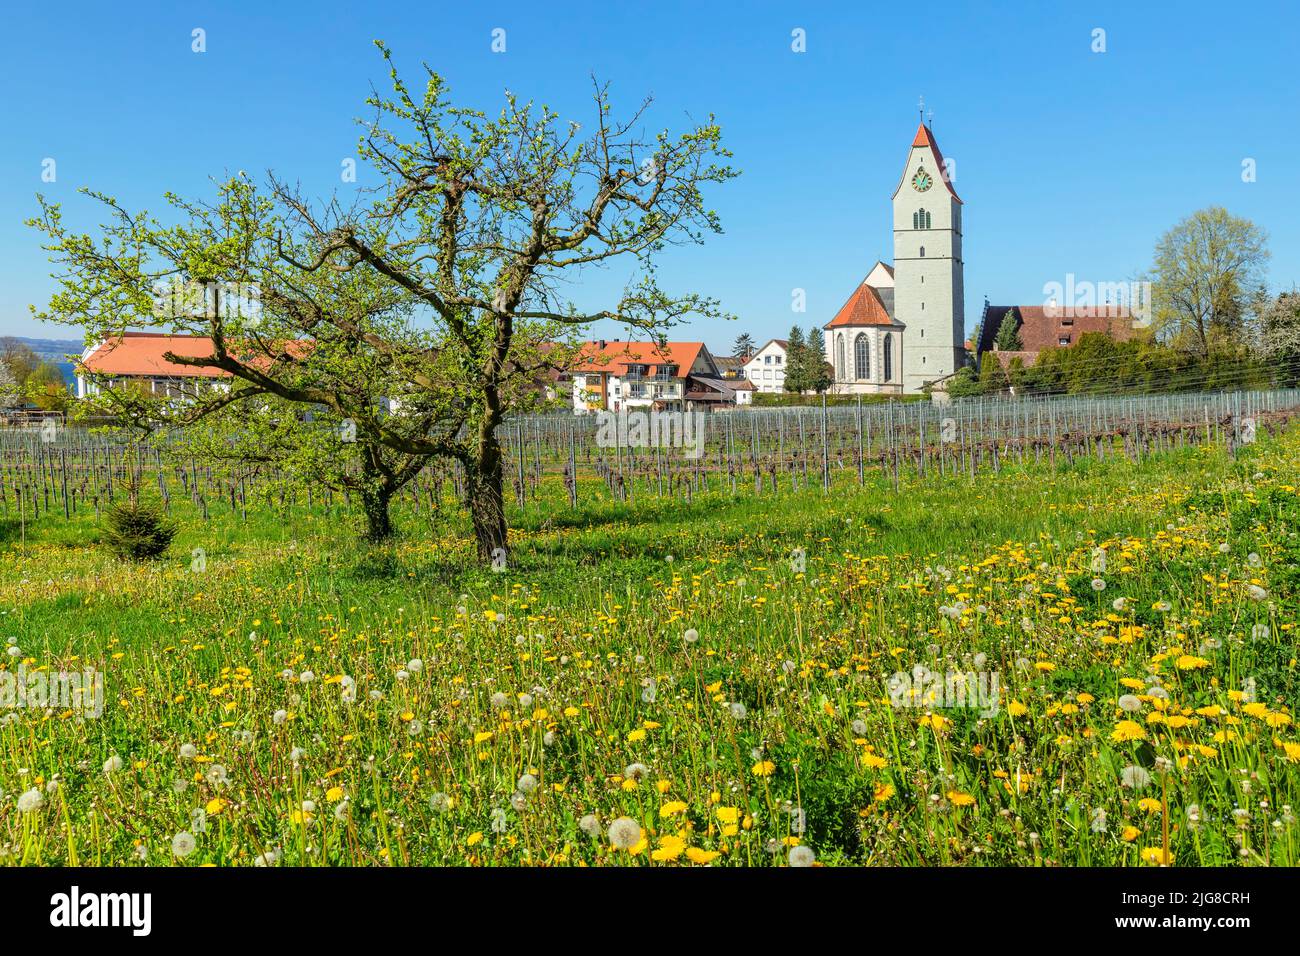 Fruit tree blossom in spring, Hagnau am Bodensee, Baden- Württemberg, Germany Stock Photo